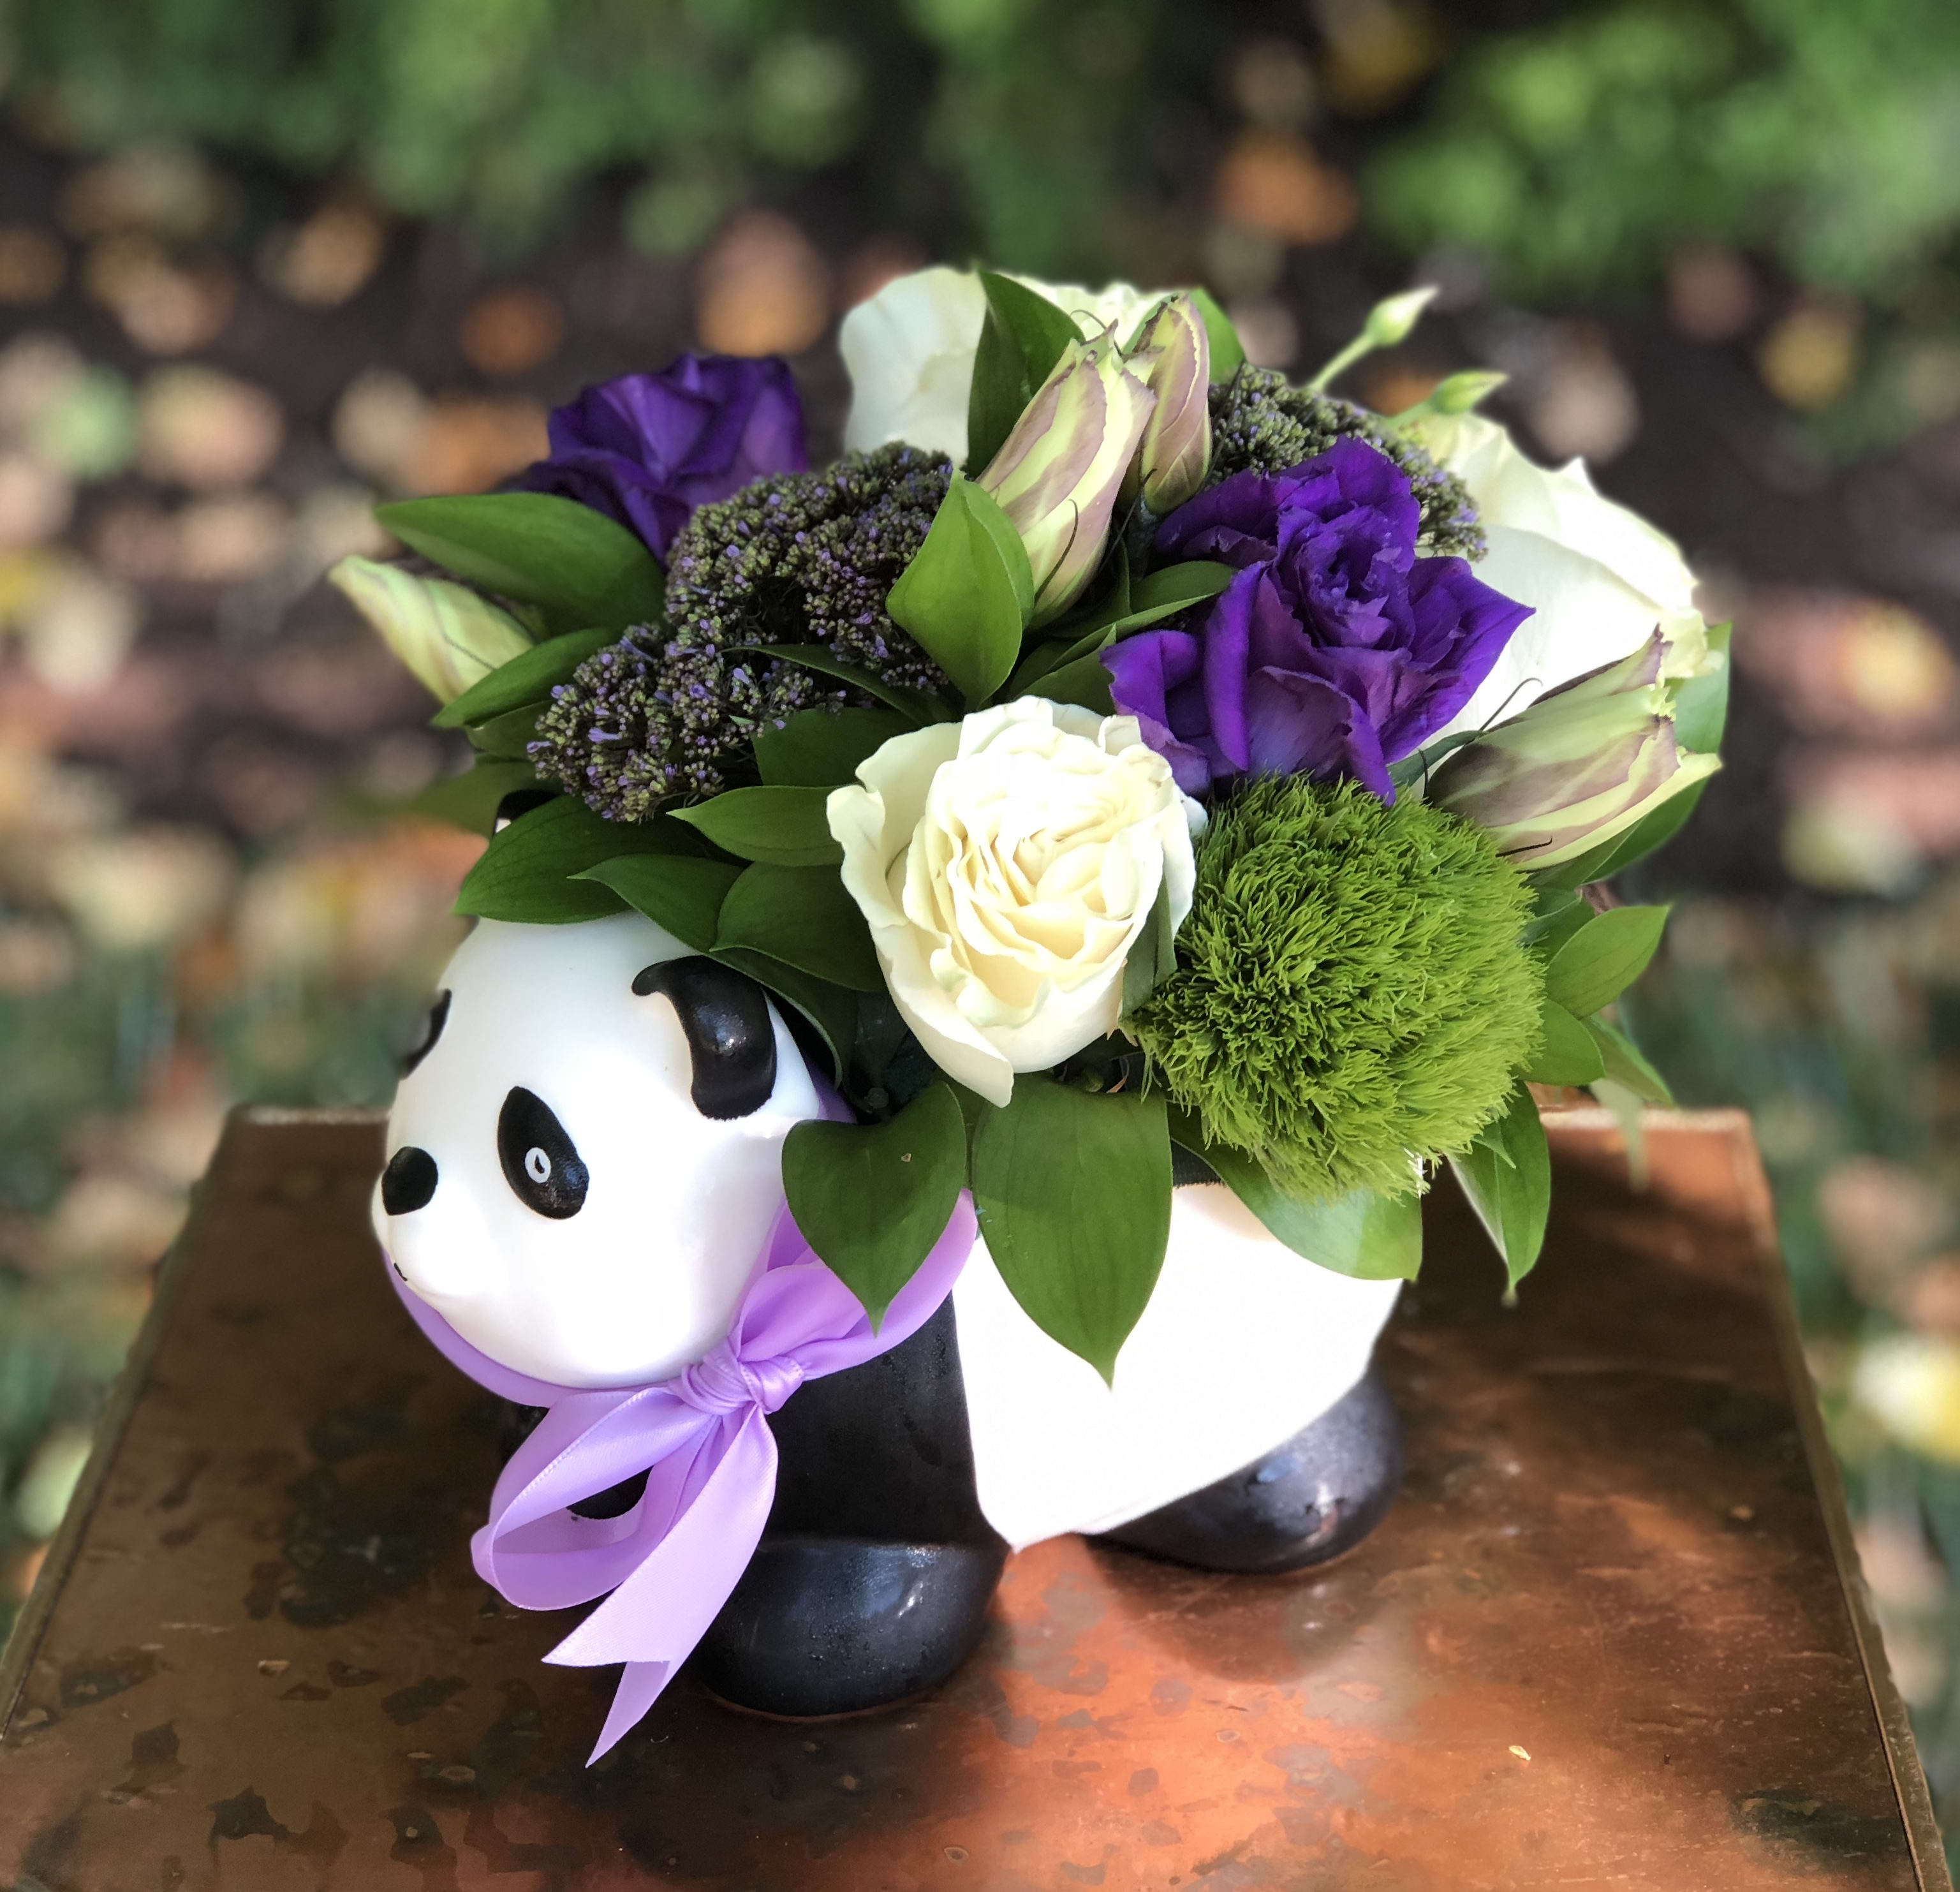 Parker the Panda - Filled with white roses, purple lizzy, purple trachelium and green dianthus, Parker is sure to please. Tax free. Same day hand delivery.